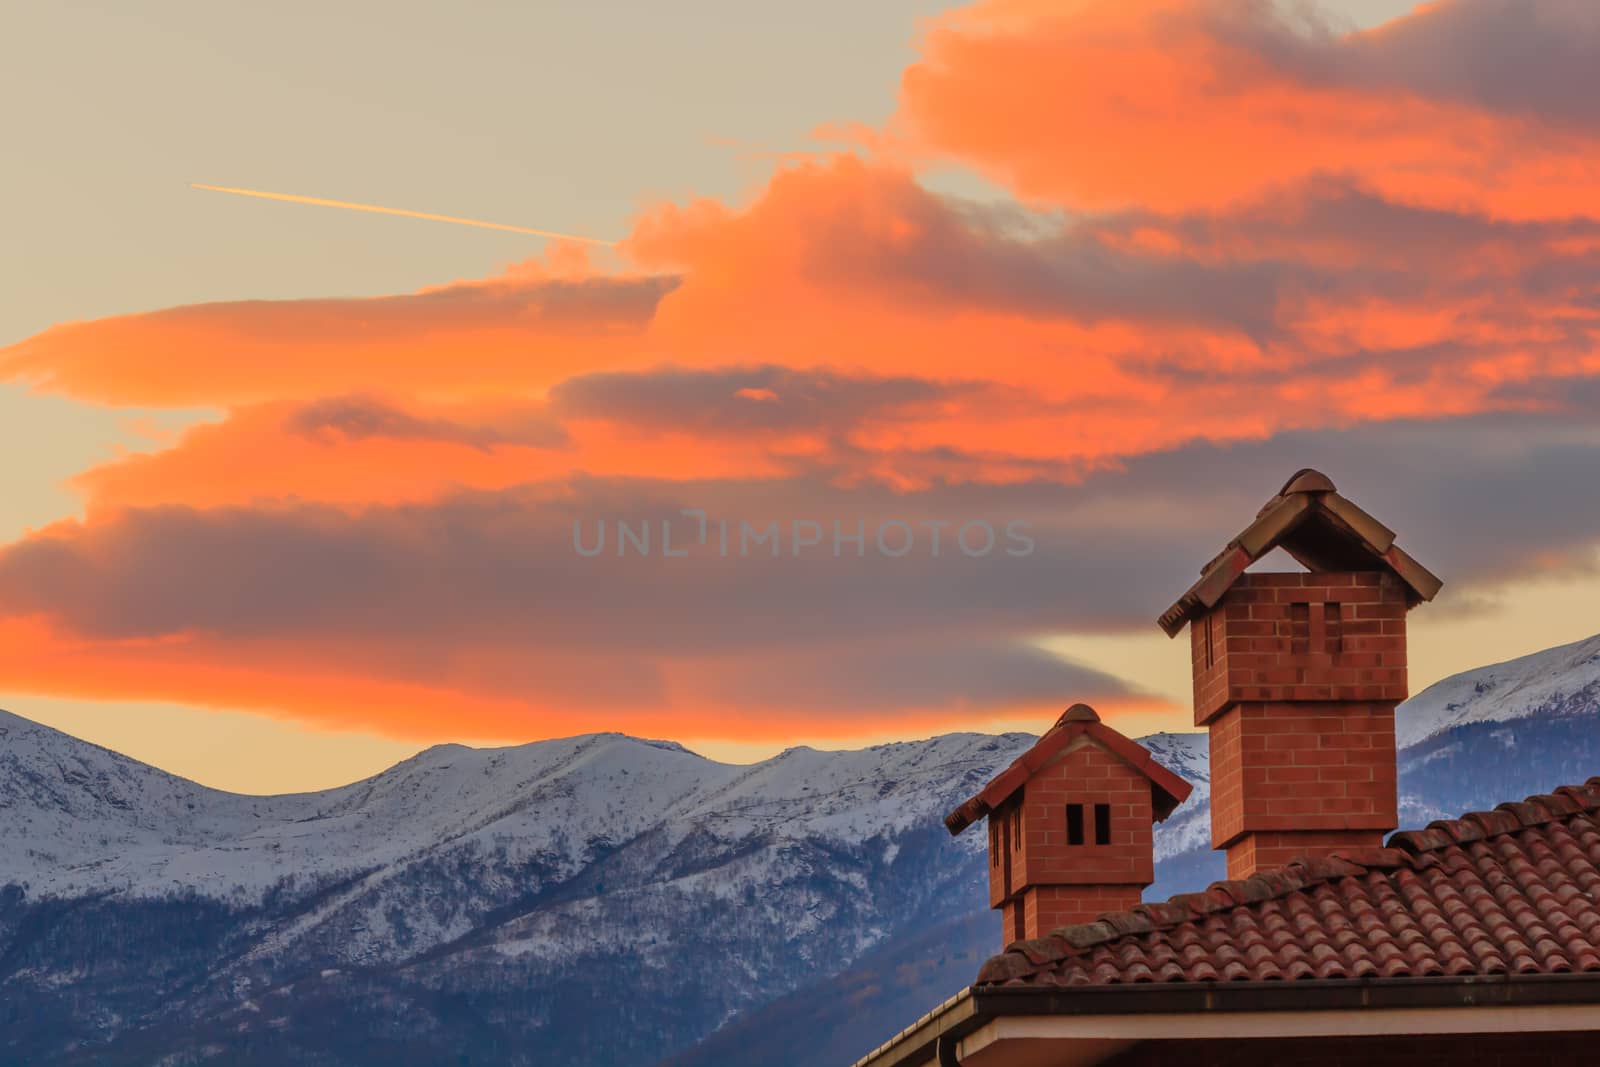 the profiles of two chimneys drawn against the background of a mountain at sunset